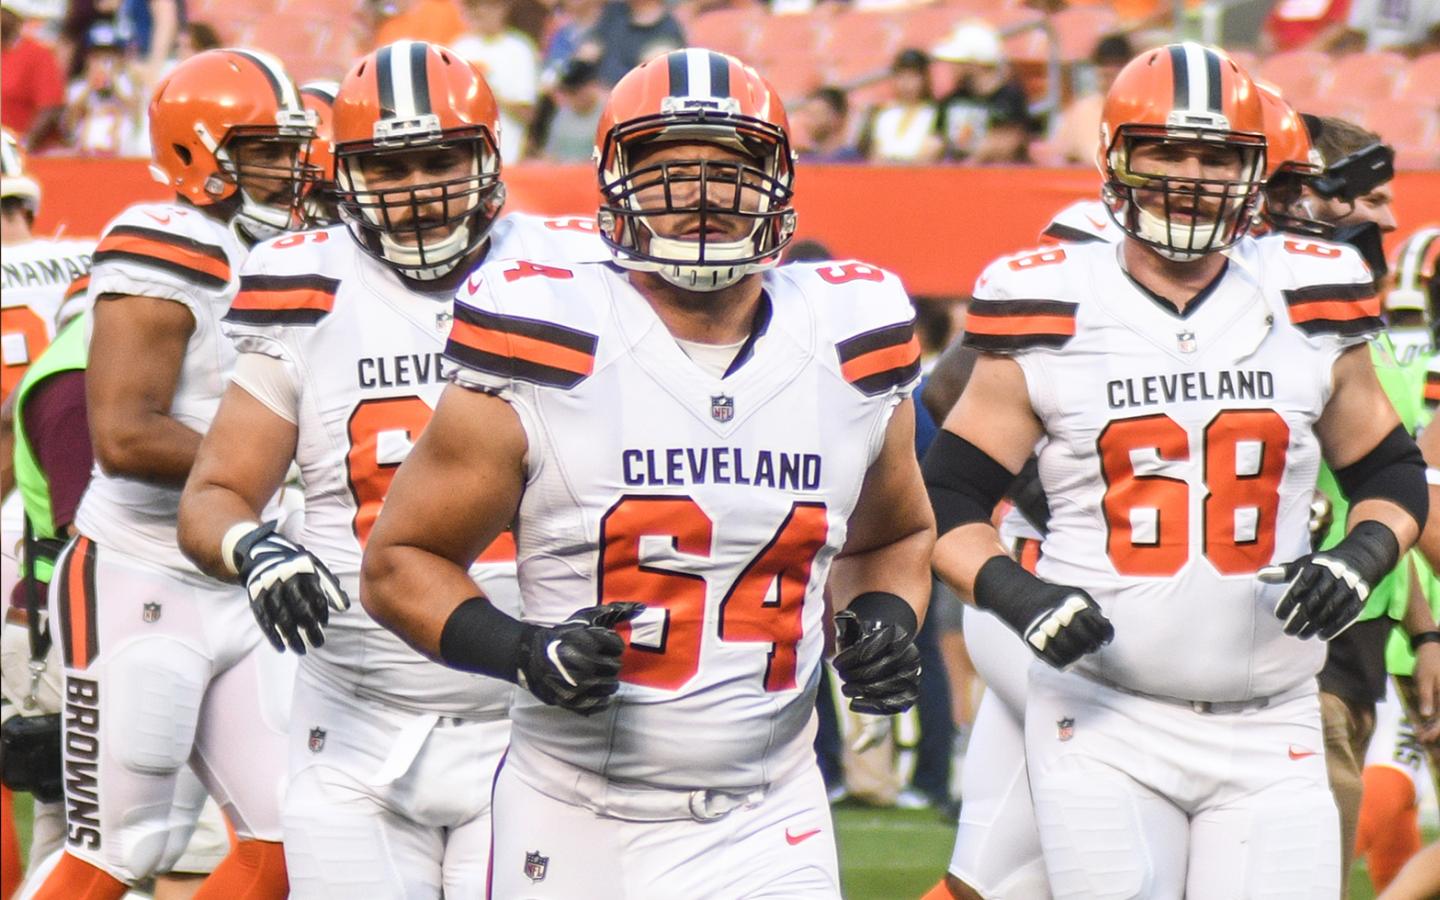 JC Tretter (#64) leads the Cleveland Browns’ offensive line onto the field (Erik Drost).